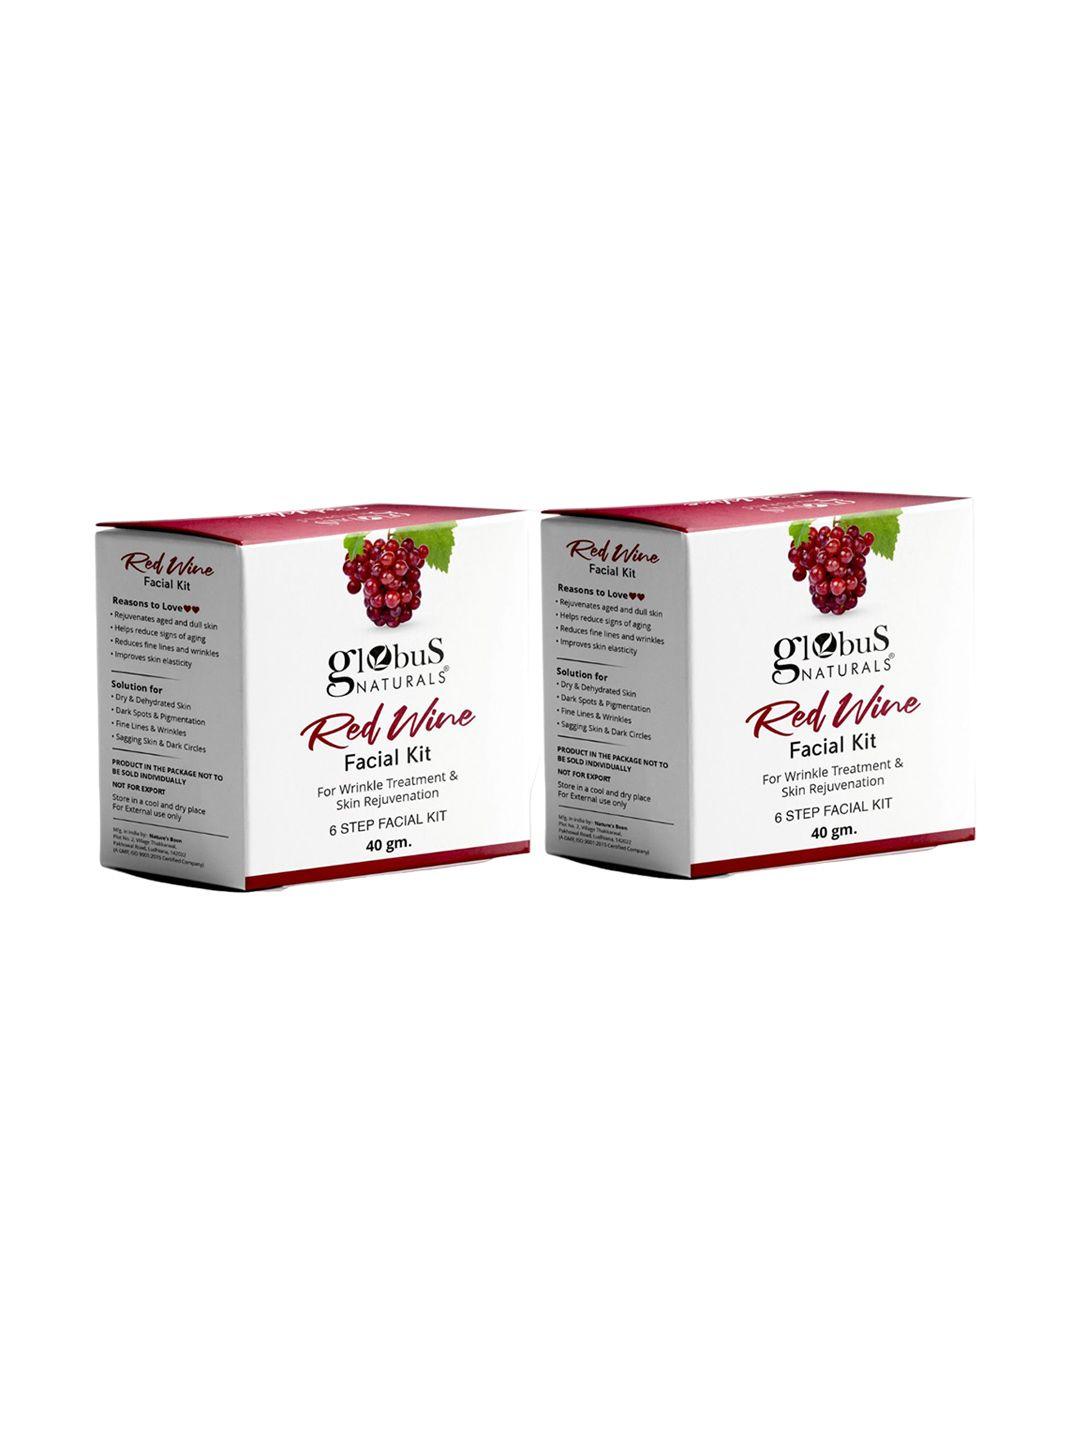 globus naturals set of 2 red wine 6 step facial kit for anti-ageing - 40g each